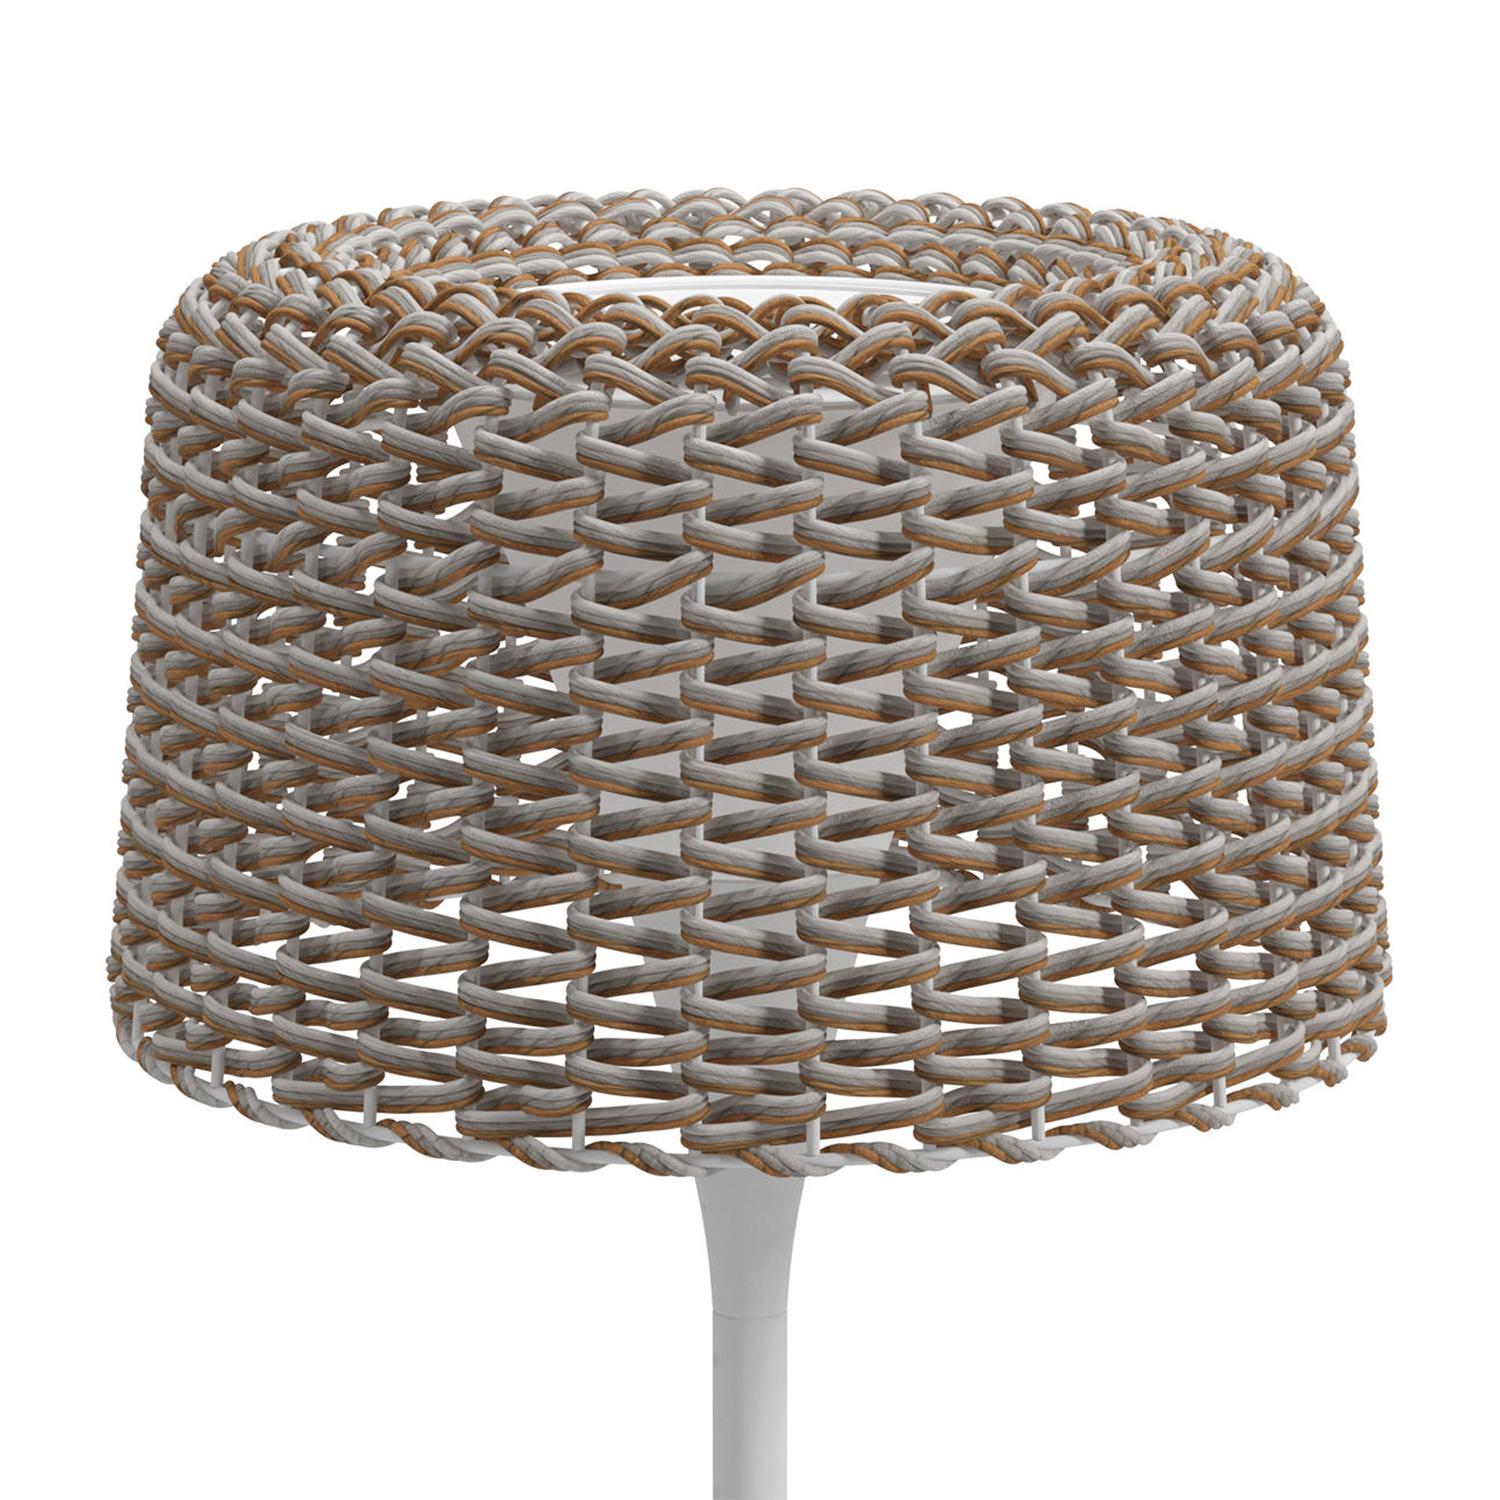 Table lamp Wicker outdoor White with wicker outdoor woven
lampshade in brown finish, with aluminium anthracite powder-coated
structure and teak trim on base edge. With solar and mains power 
rechargable LED light unit. Adaptor Output 4.2V. 65ft